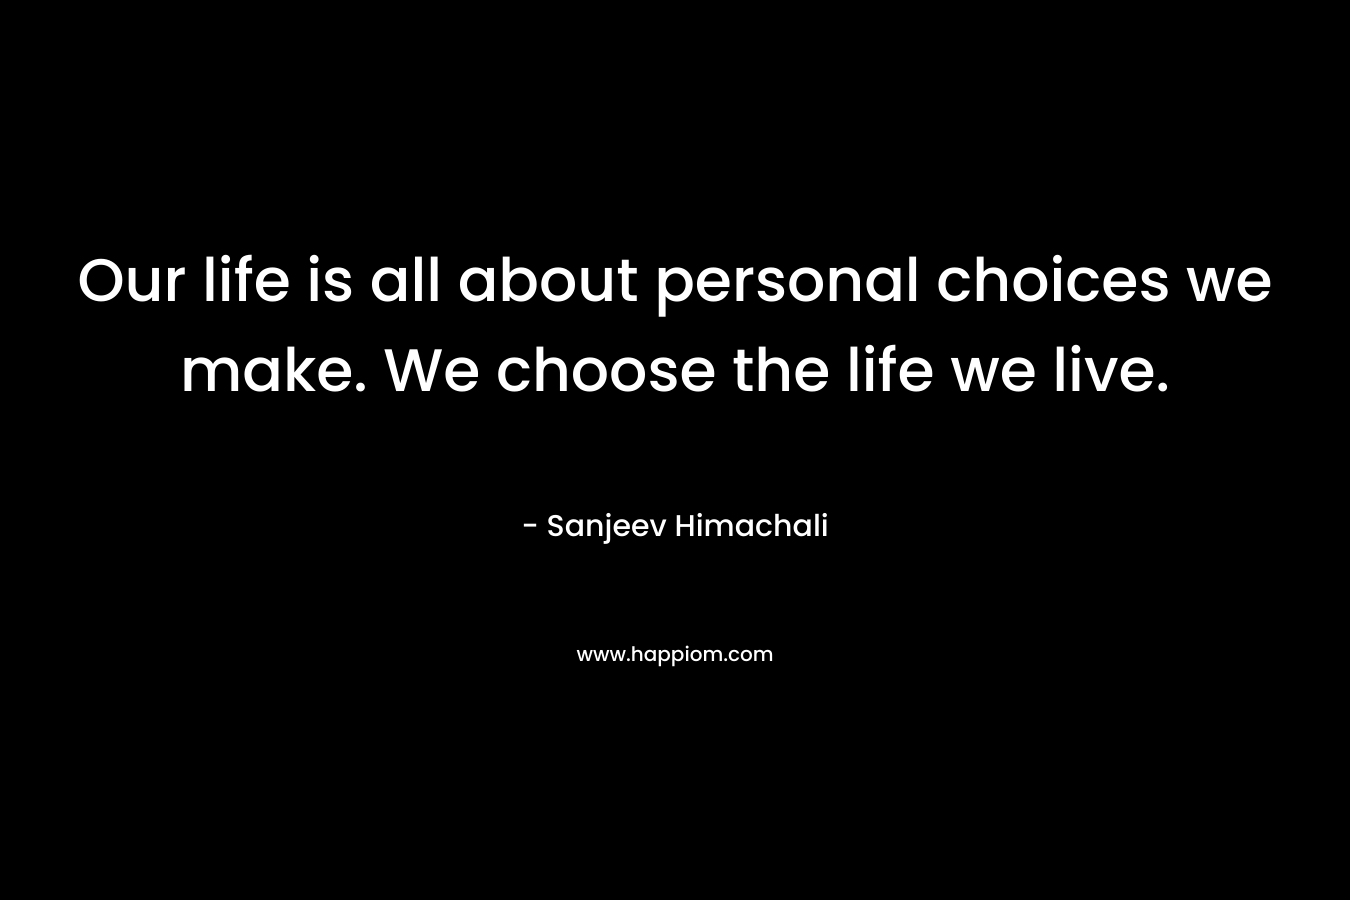 Our life is all about personal choices we make. We choose the life we live. – Sanjeev Himachali